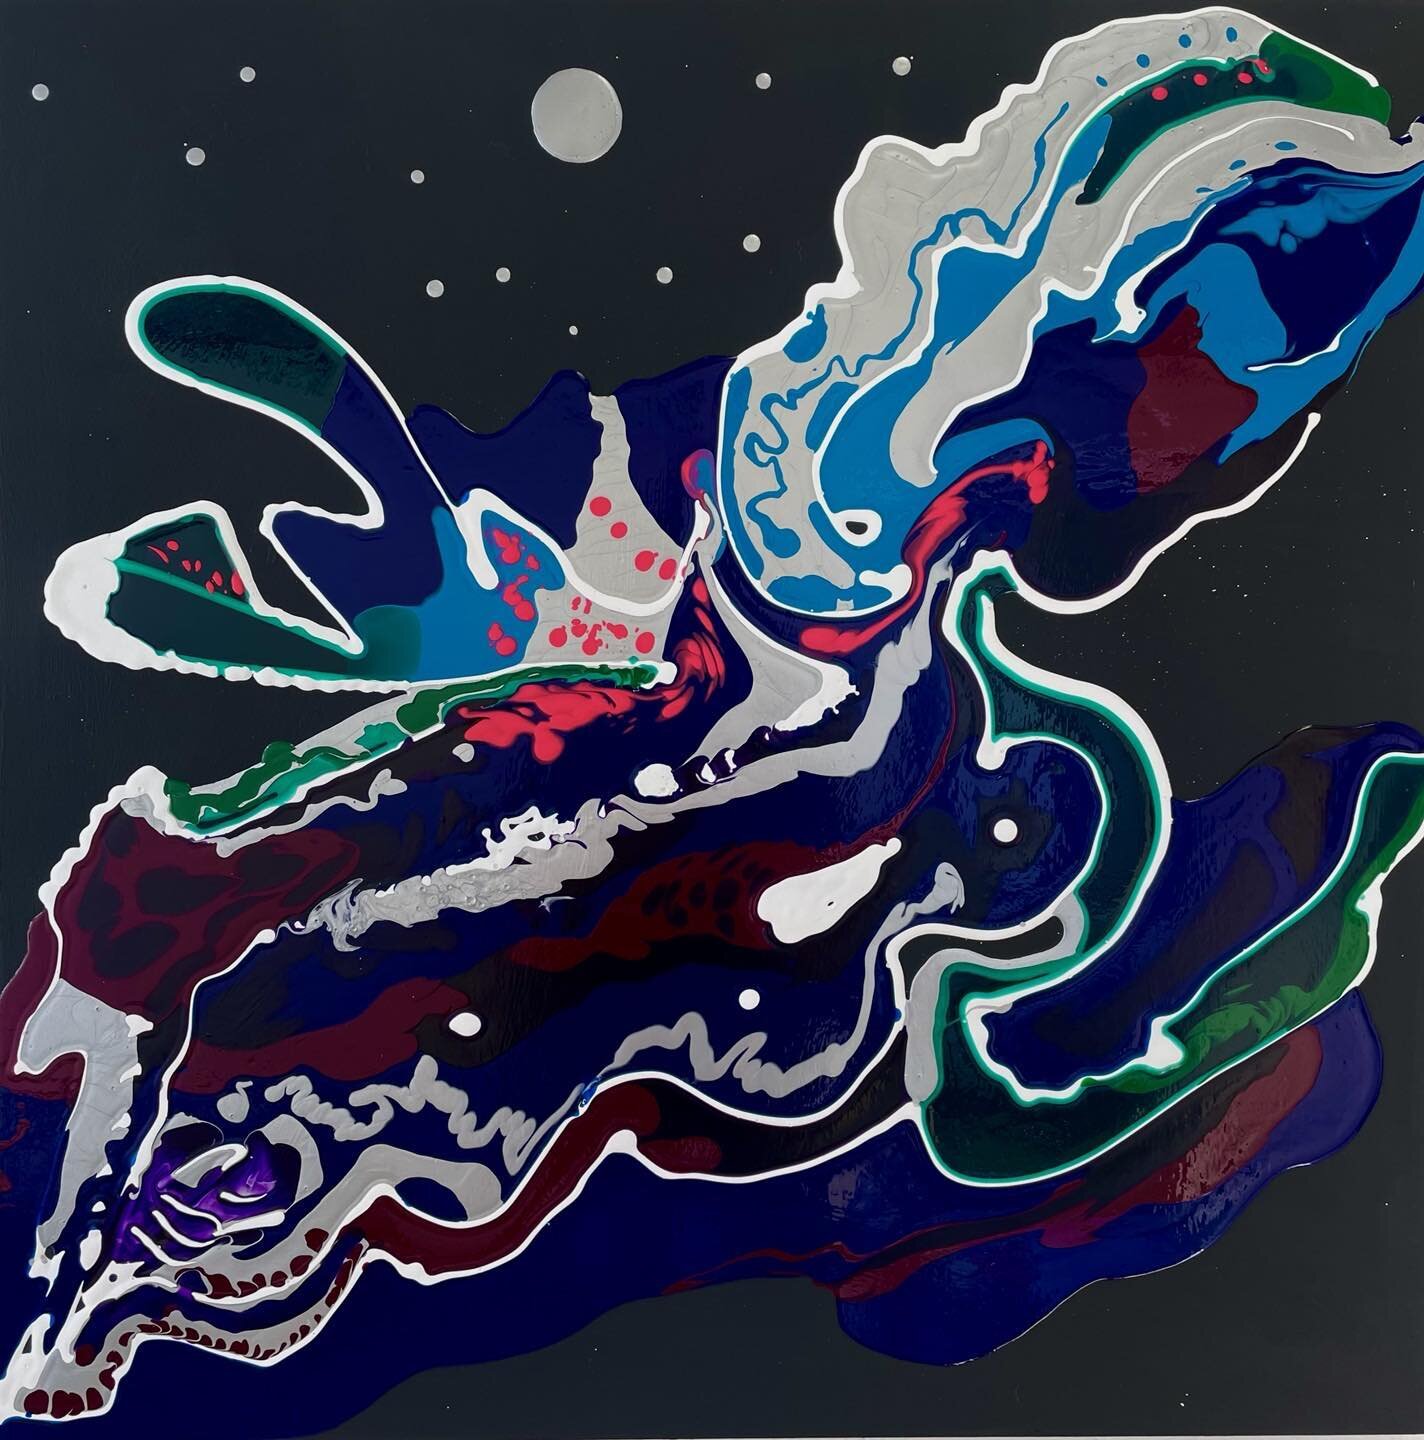 She Flies at Night, inspired by the Grand River and all the beautiful fliers that seem to emerge in the warm nights of July.  She comes out of the river under the cover of darkness.  #grandriver #ferguselora #janicethomsonart #contemporaryart #contem